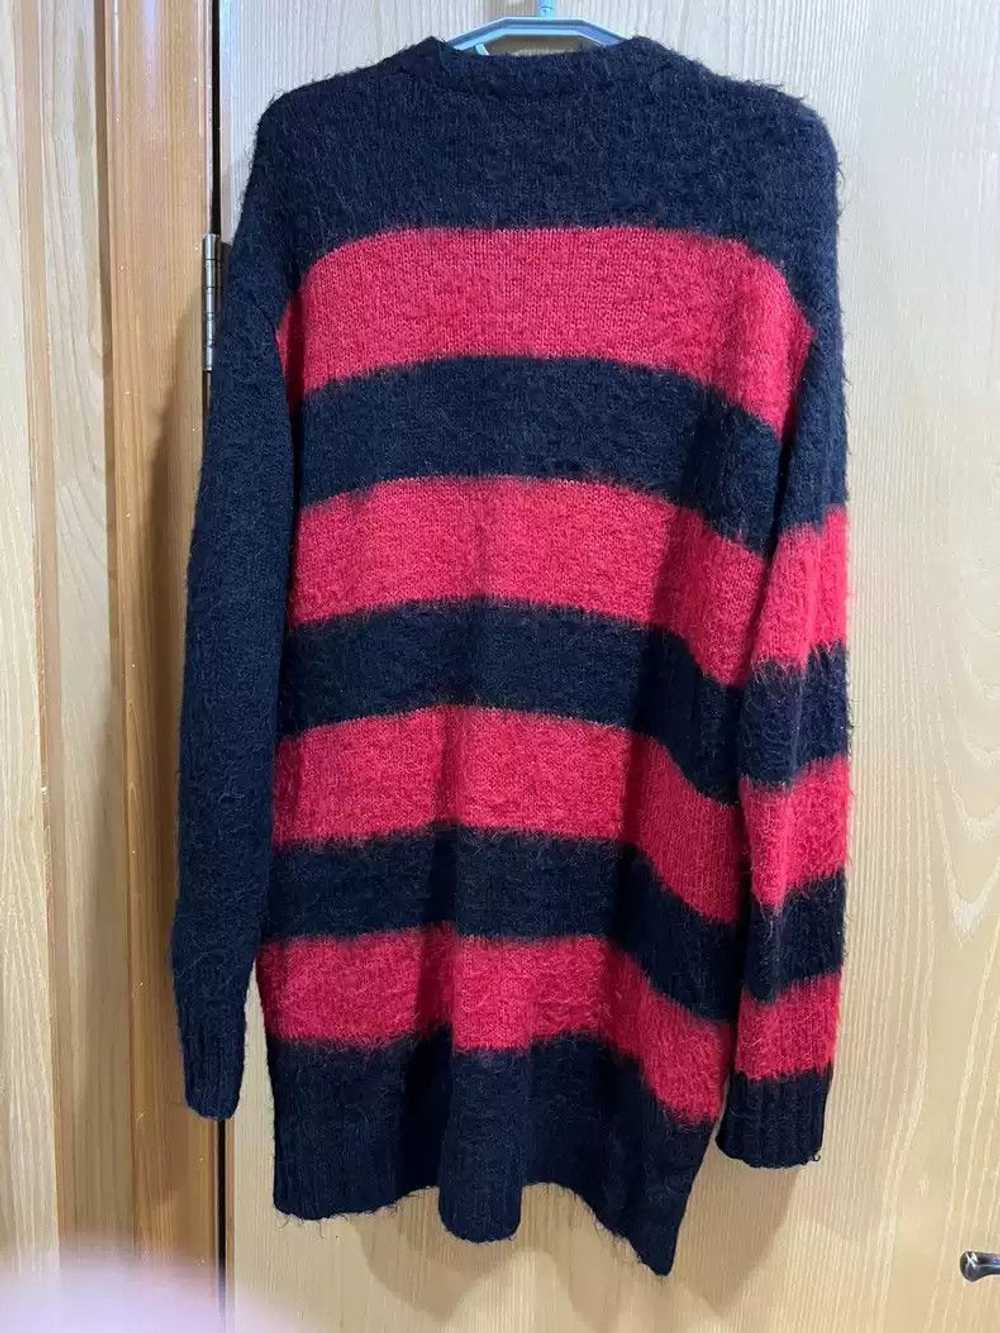 Undercover undercover 21aw mohair sweater - image 2